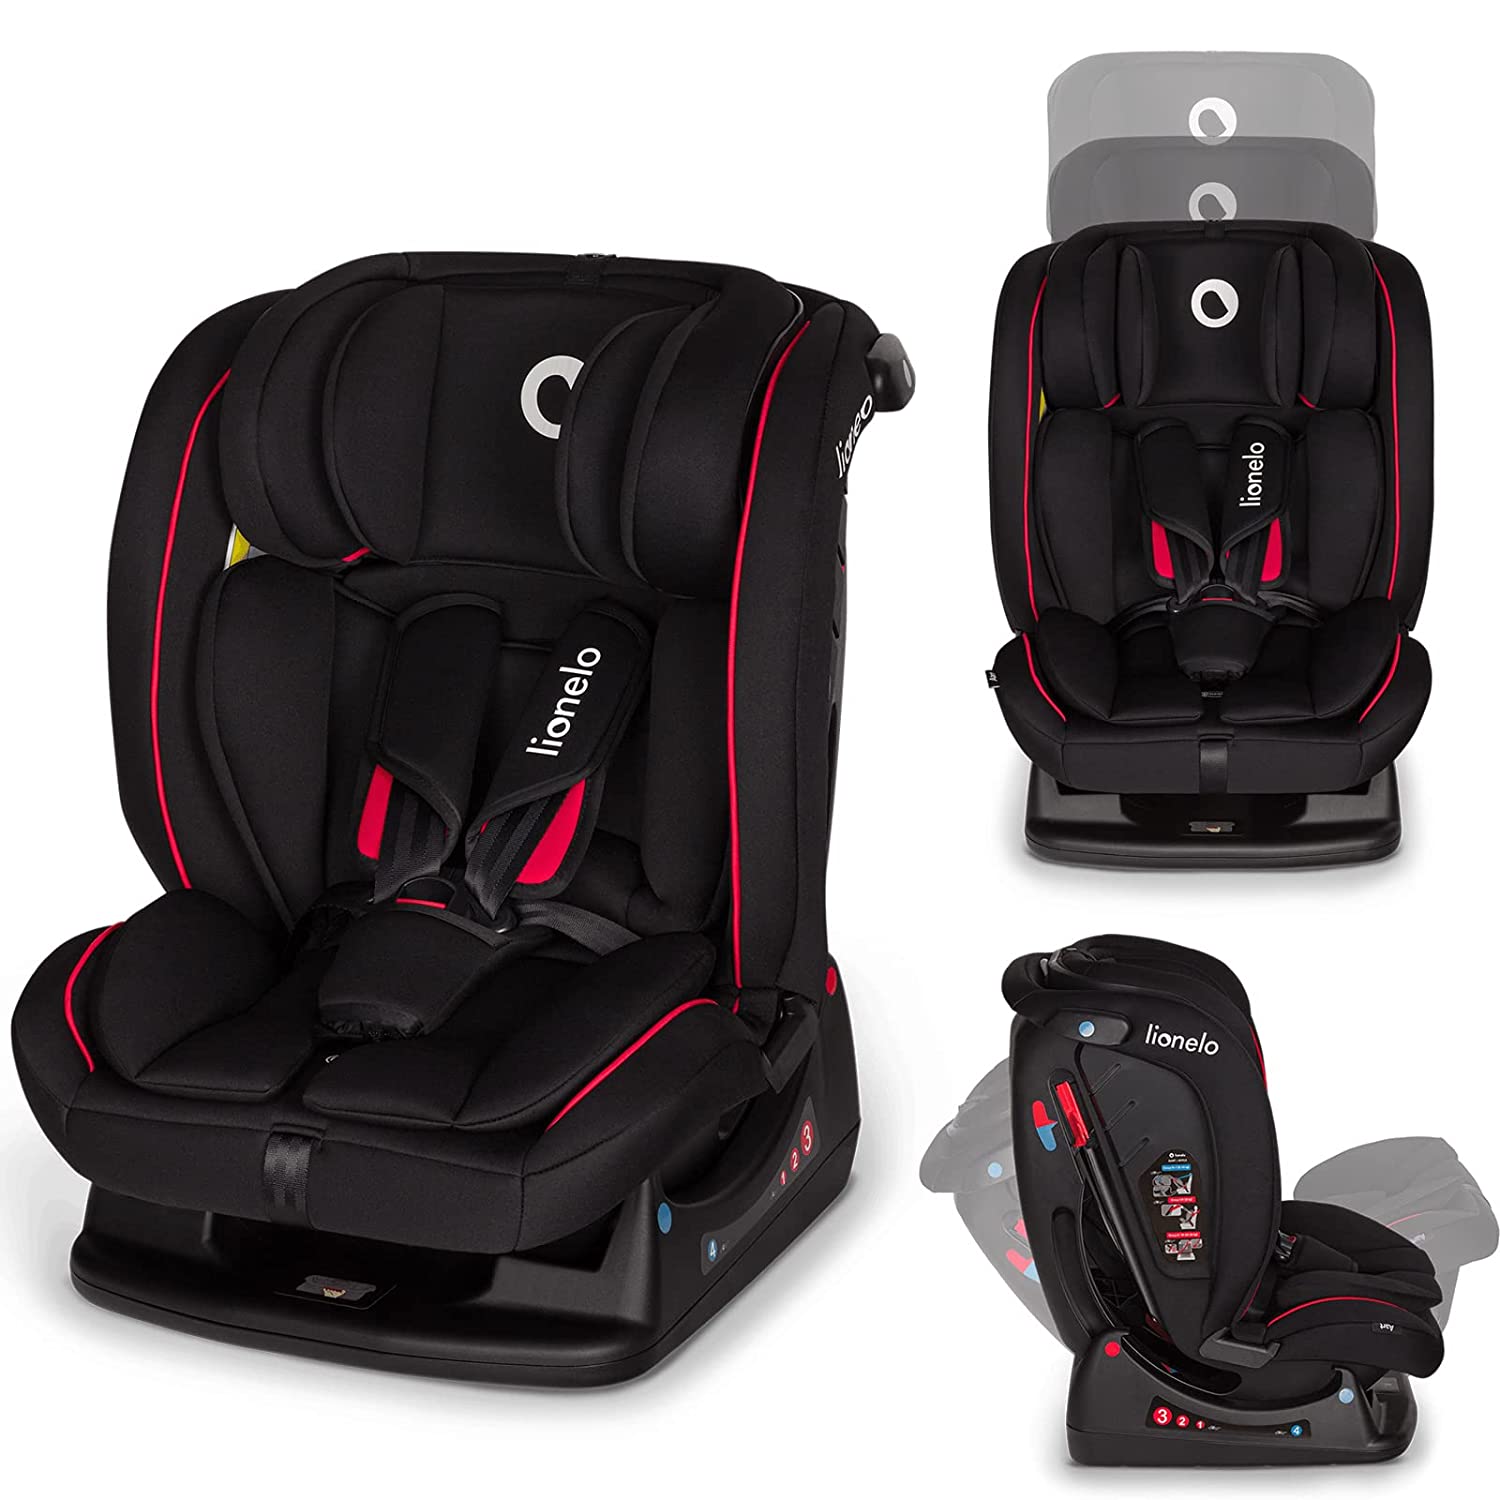 LIONELO Aart Child Car Seat from 0-36 kg, Group 0/1/2/3, ECE R44/04, 5-Point Harness System, Reverse Driving Option, Headrest and Tilt Adjustment, Additional Side Protection (Black Carbon Red)